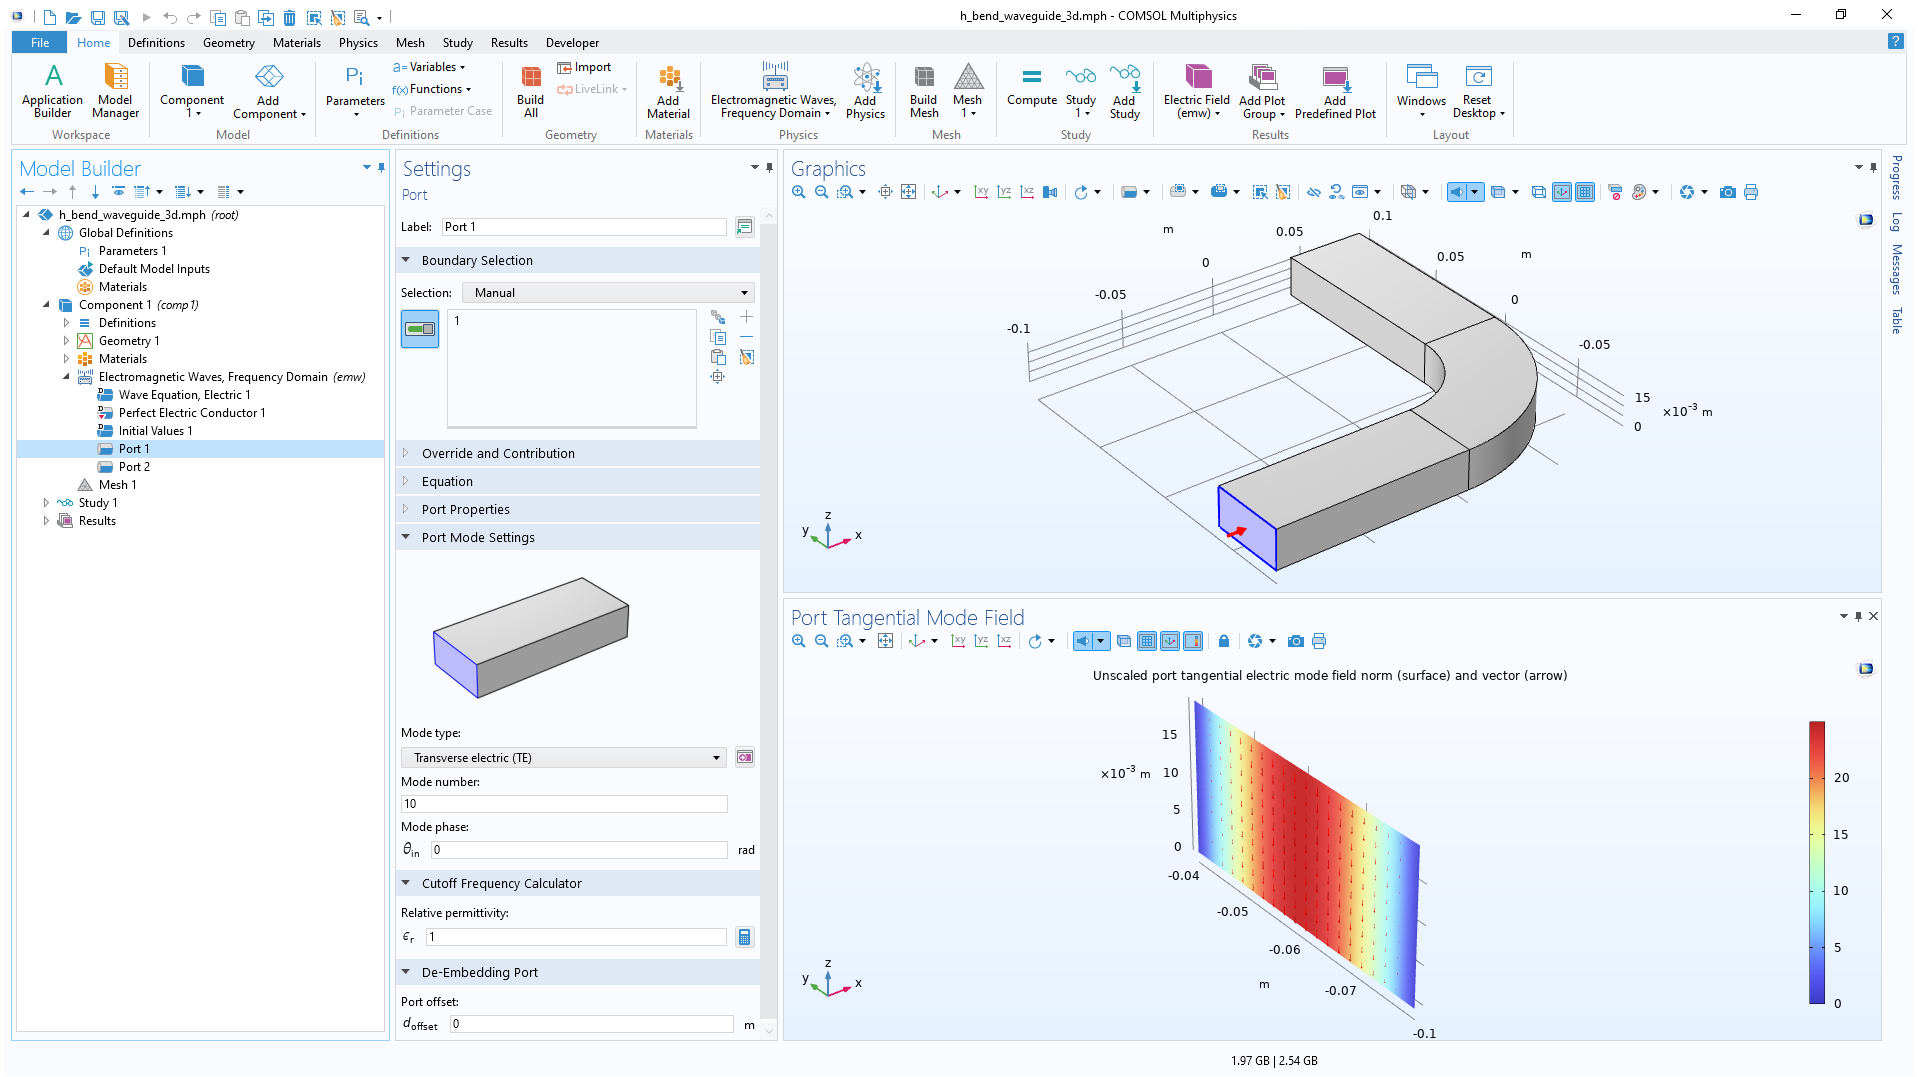 The COMSOL Multiphysics UI showing the Model Builder with the Port condition selected, the corresponding Settings window, a Graphics window with an H-bend model, and a Port Tangential Mode Field window showing a mode field in the Rainbow color table.